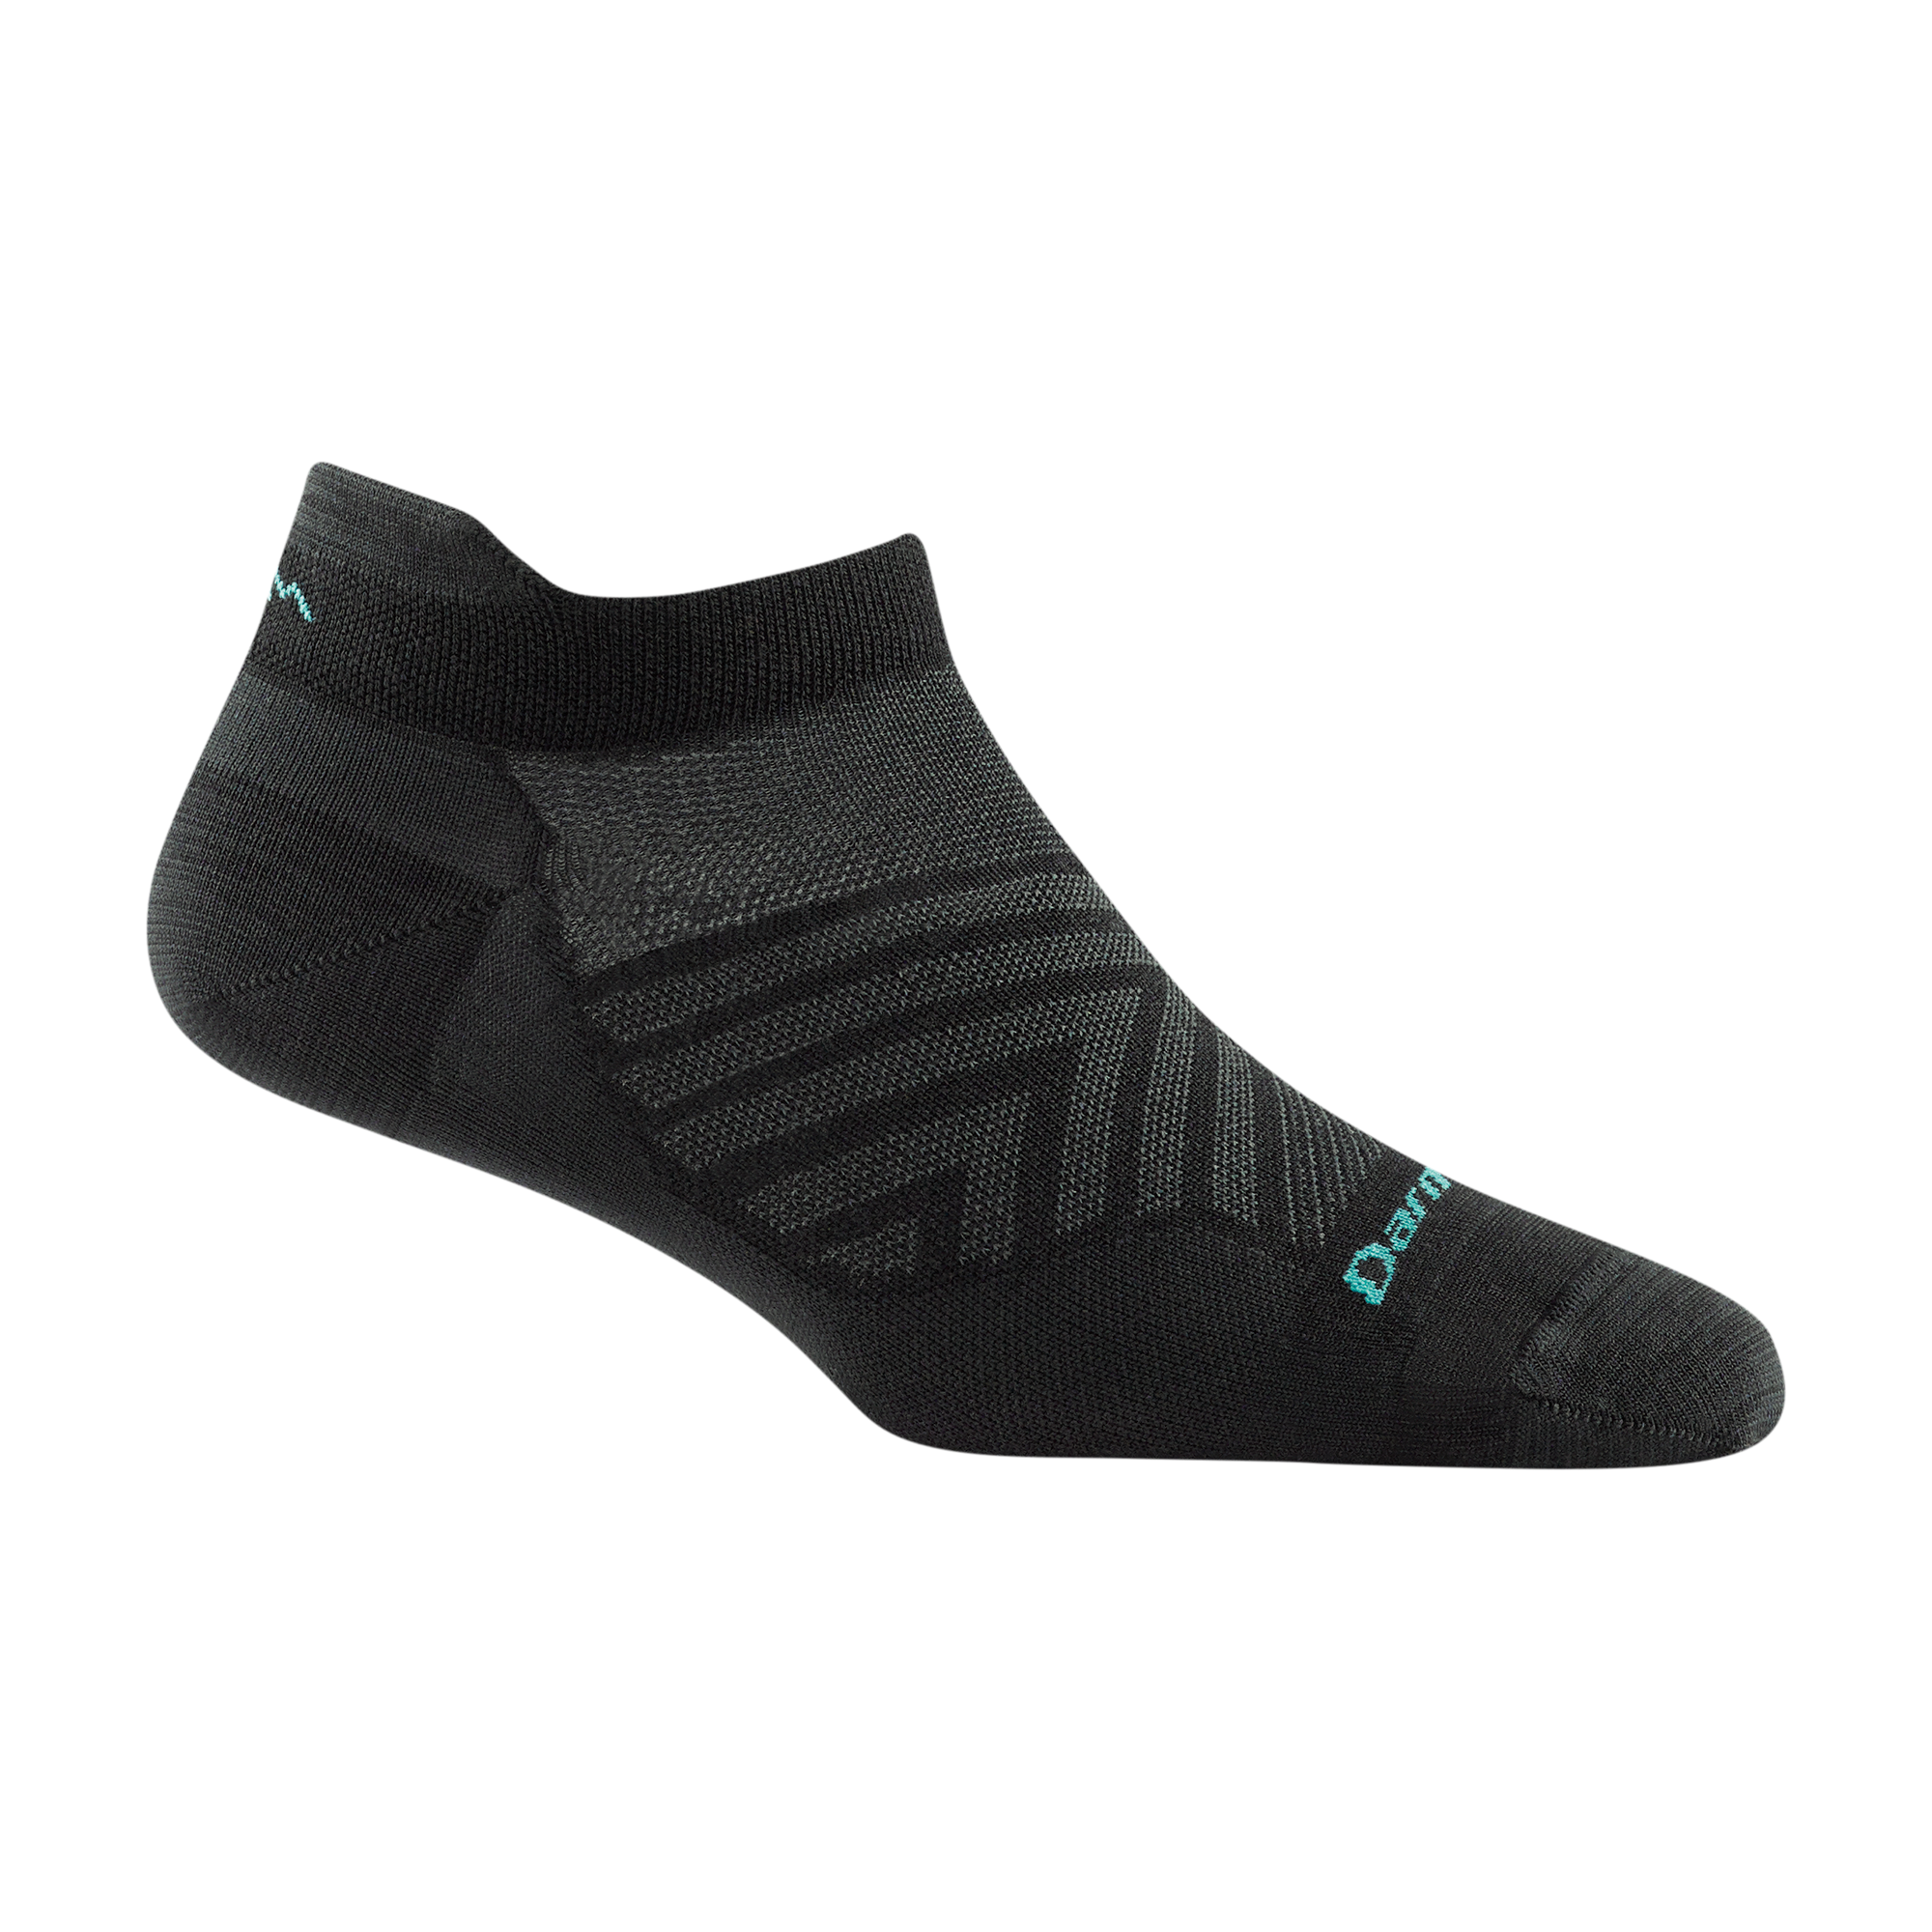 1043 women's no show tab running sock in black with gray chevron forefoot details and blue darn tough signature